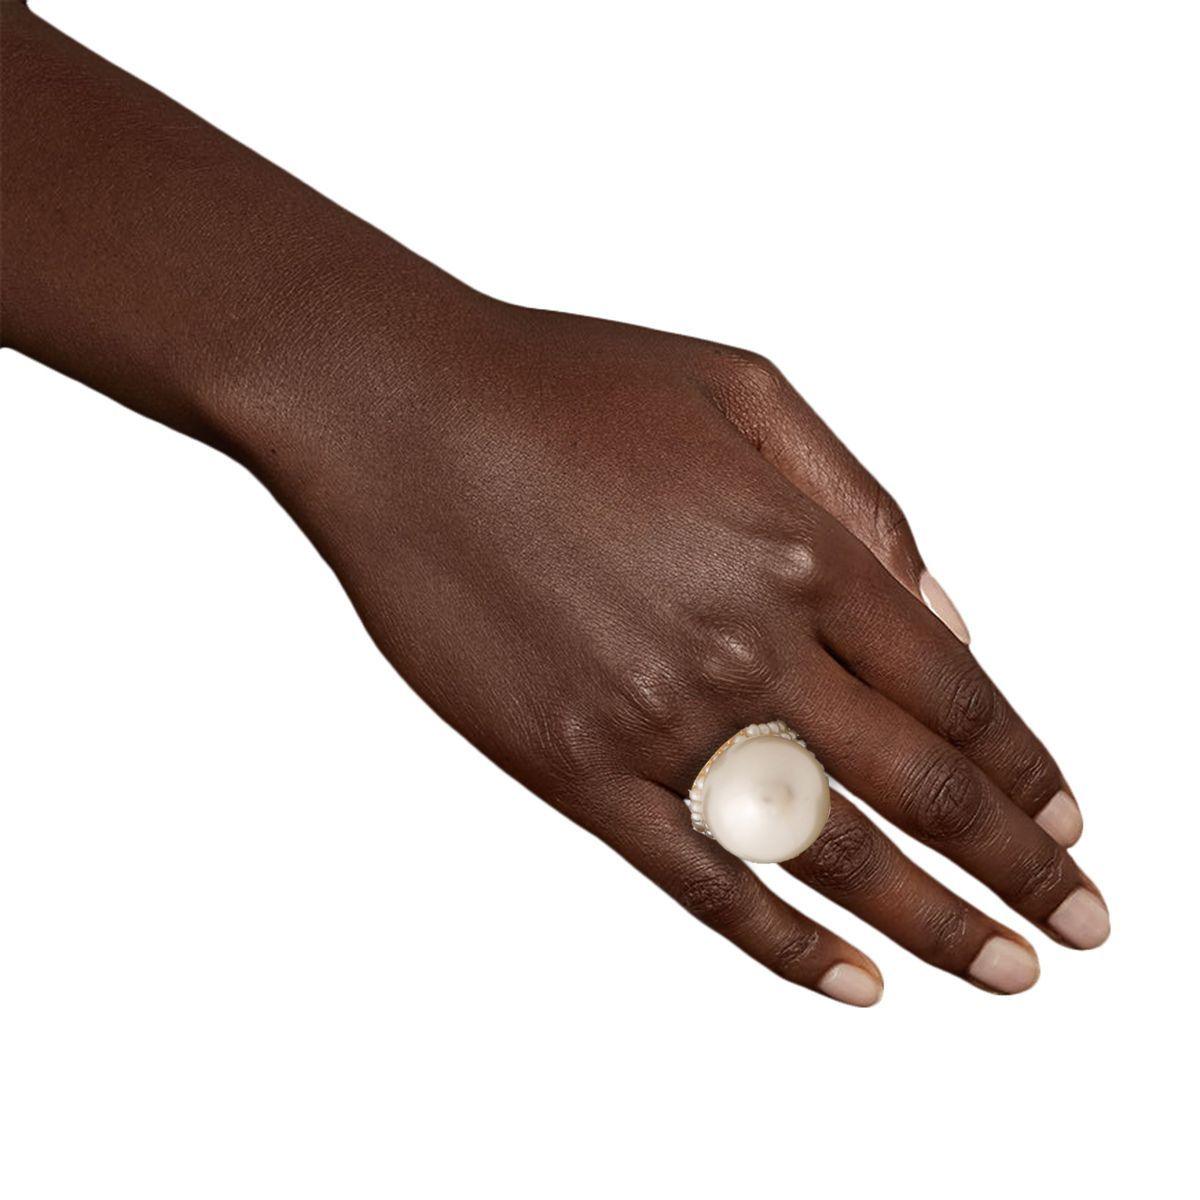 Get Glam with our Creamy Faux Pearl Cocktail Ring - Shop Now